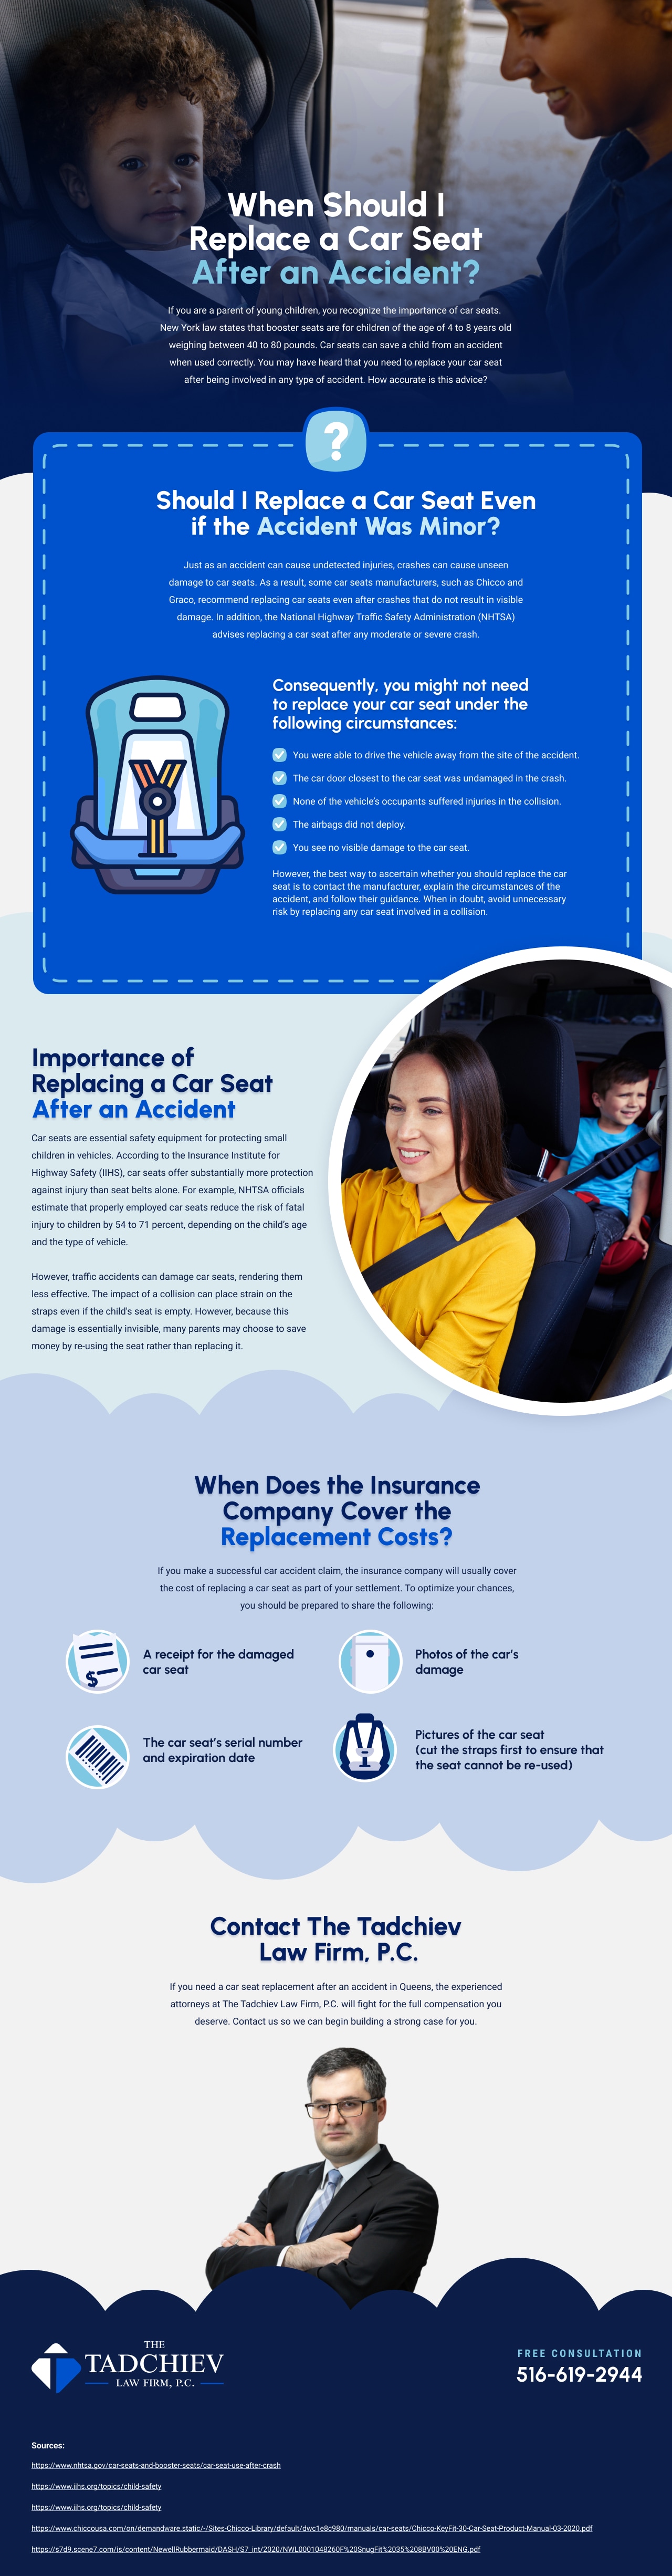 When Should I Replace a Car Seat After an Accident